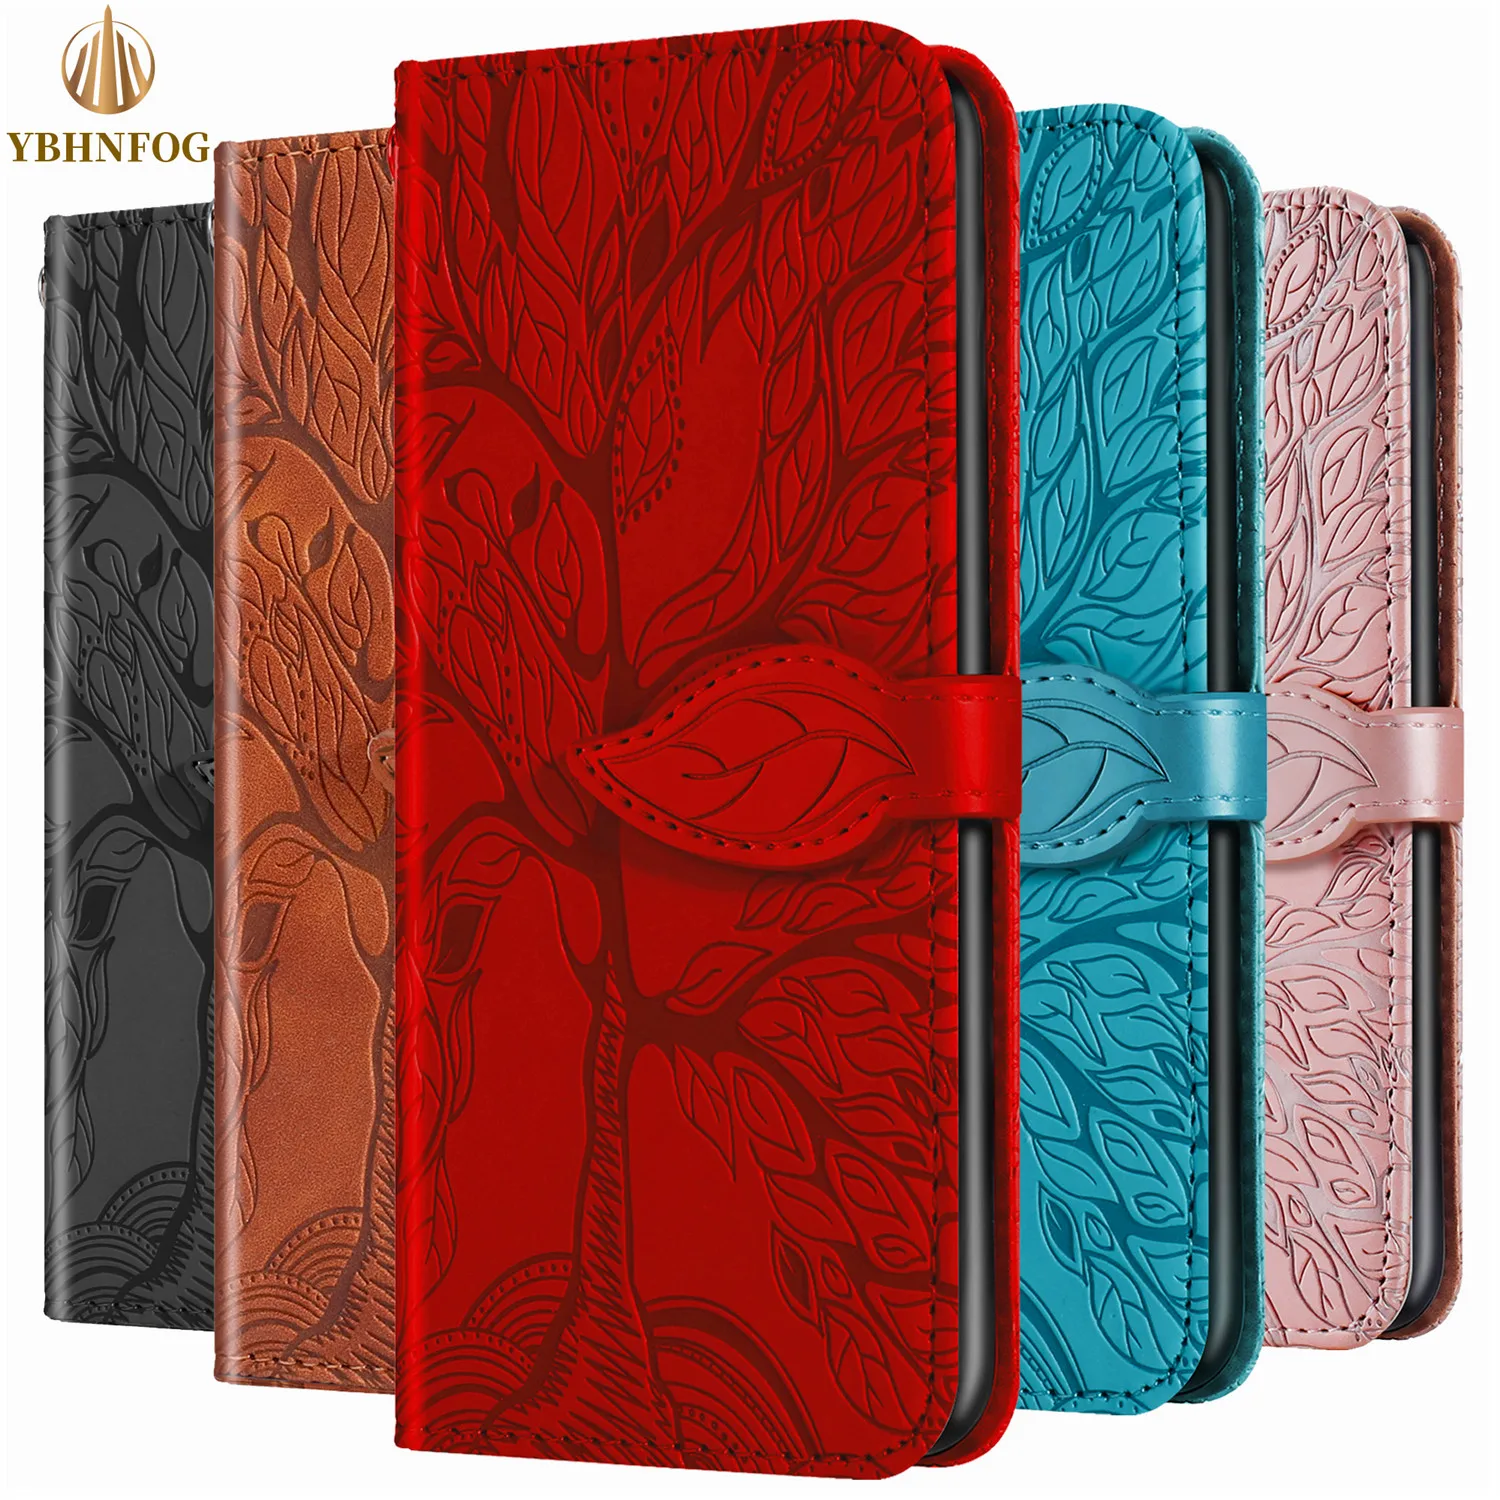 3D Tree Pattern Leather Flip Phone Case For iPhone 13 11 Pro Max 12 Mini XR X XS 6 6S 7 8 Plus SE 2020 Holder Wallet Satnd Cover apple 13 case iPhone 13